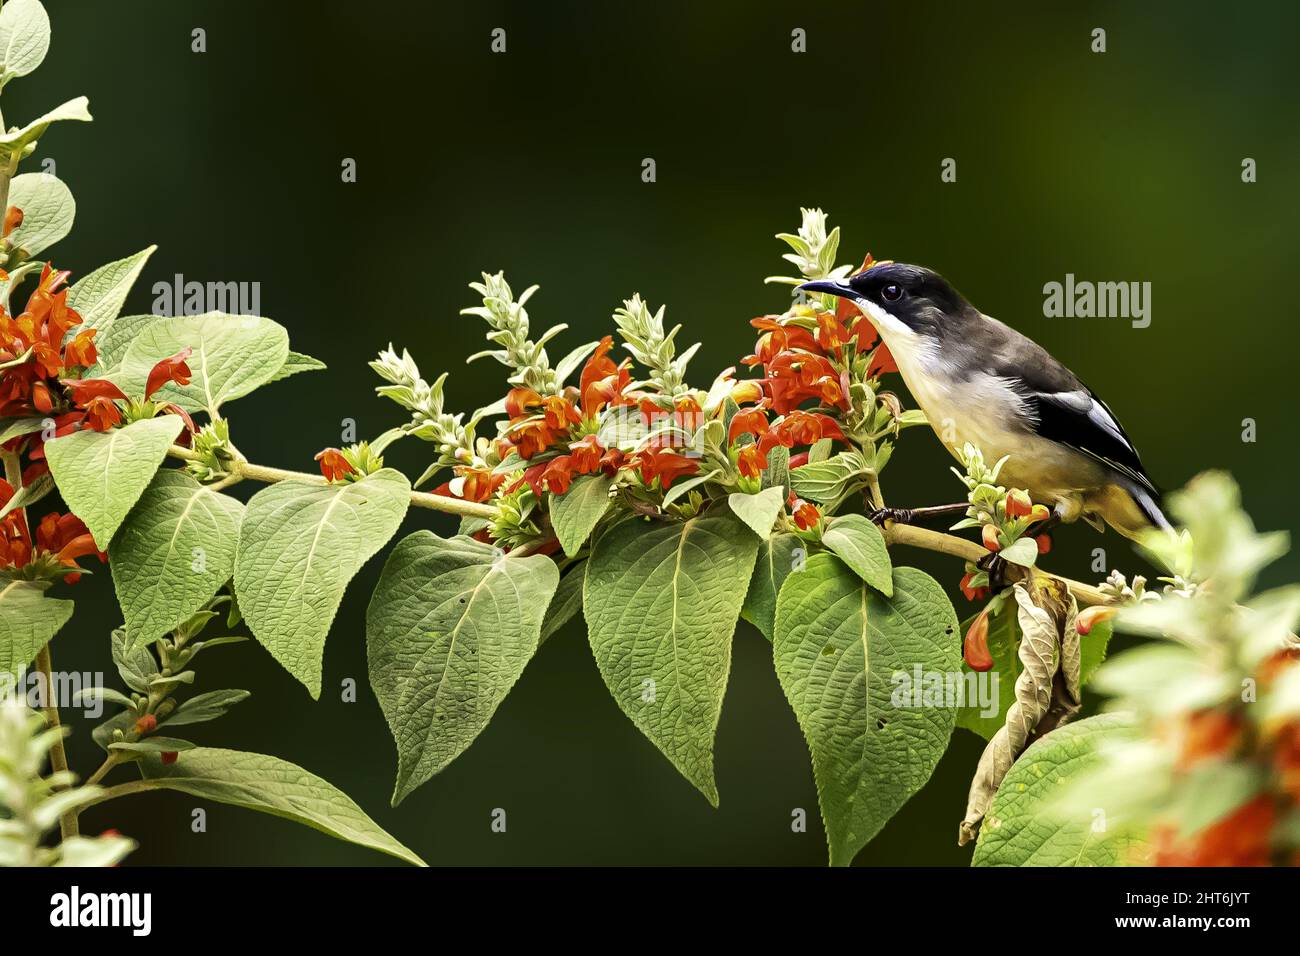 Shallow focus of a Dark-backed sibia bird on a branch of Colquhounia plant with a green background Stock Photo